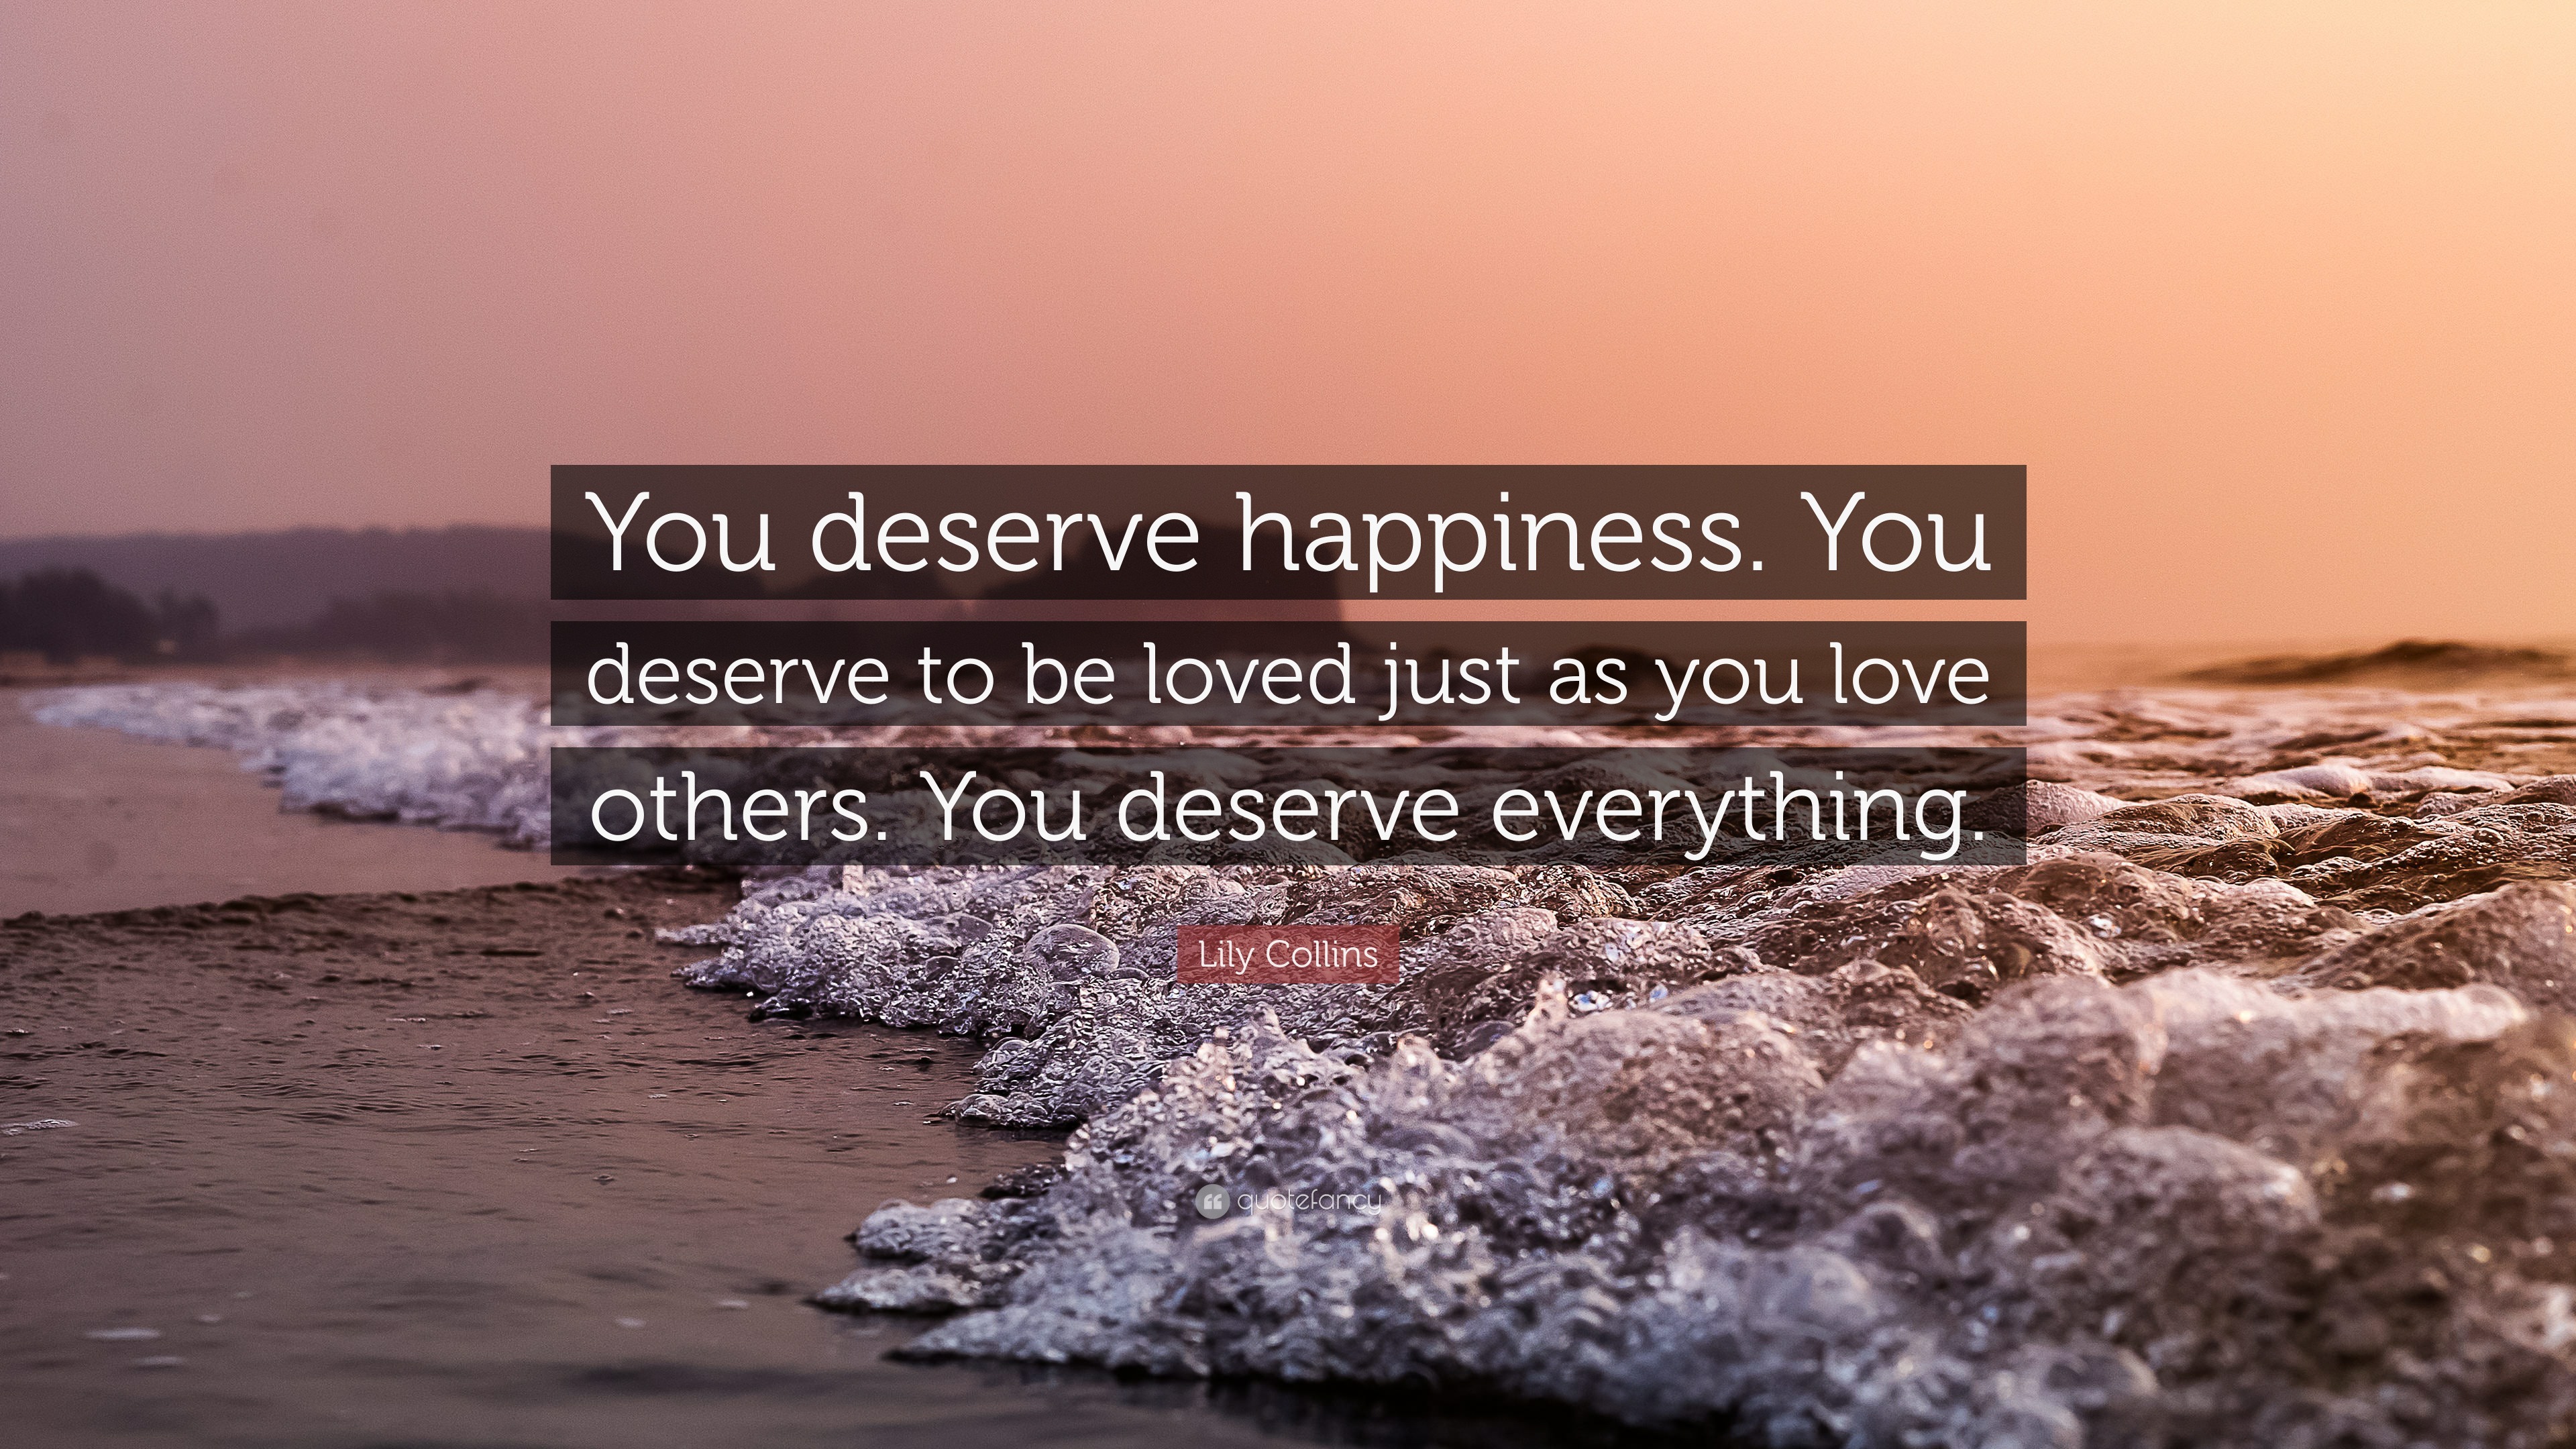 Lily Collins Quote You Deserve Happiness You Deserve To Be Loved Just As You Love Others